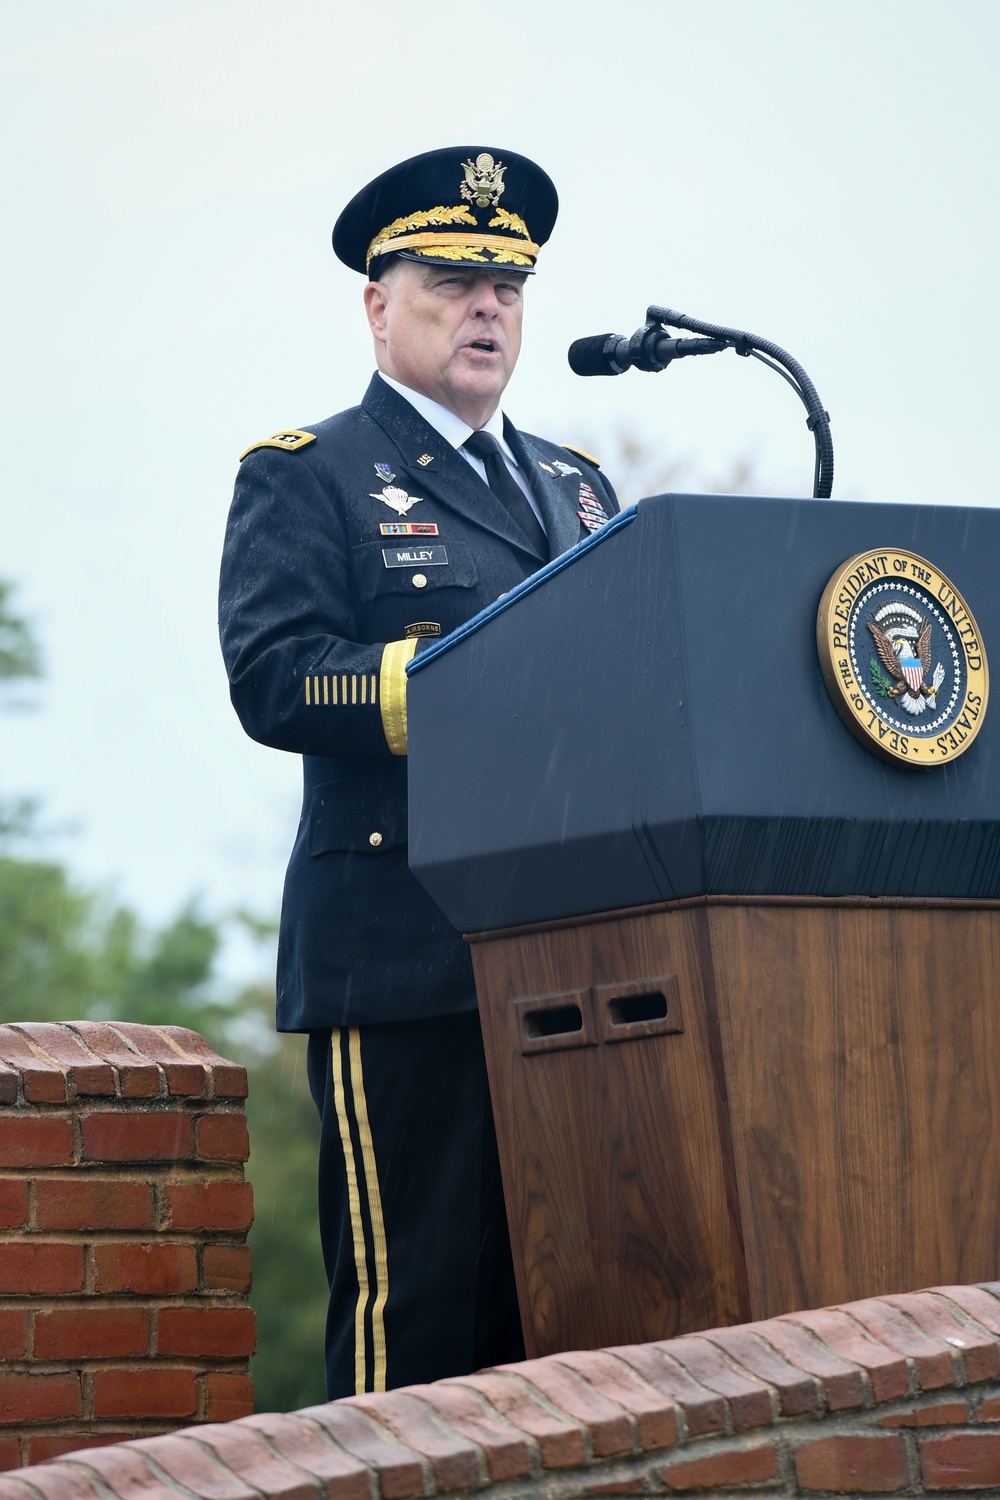 Armed Forces Welcome Ceremony in Honor of U.S. Army Gen. Mark A. Milley